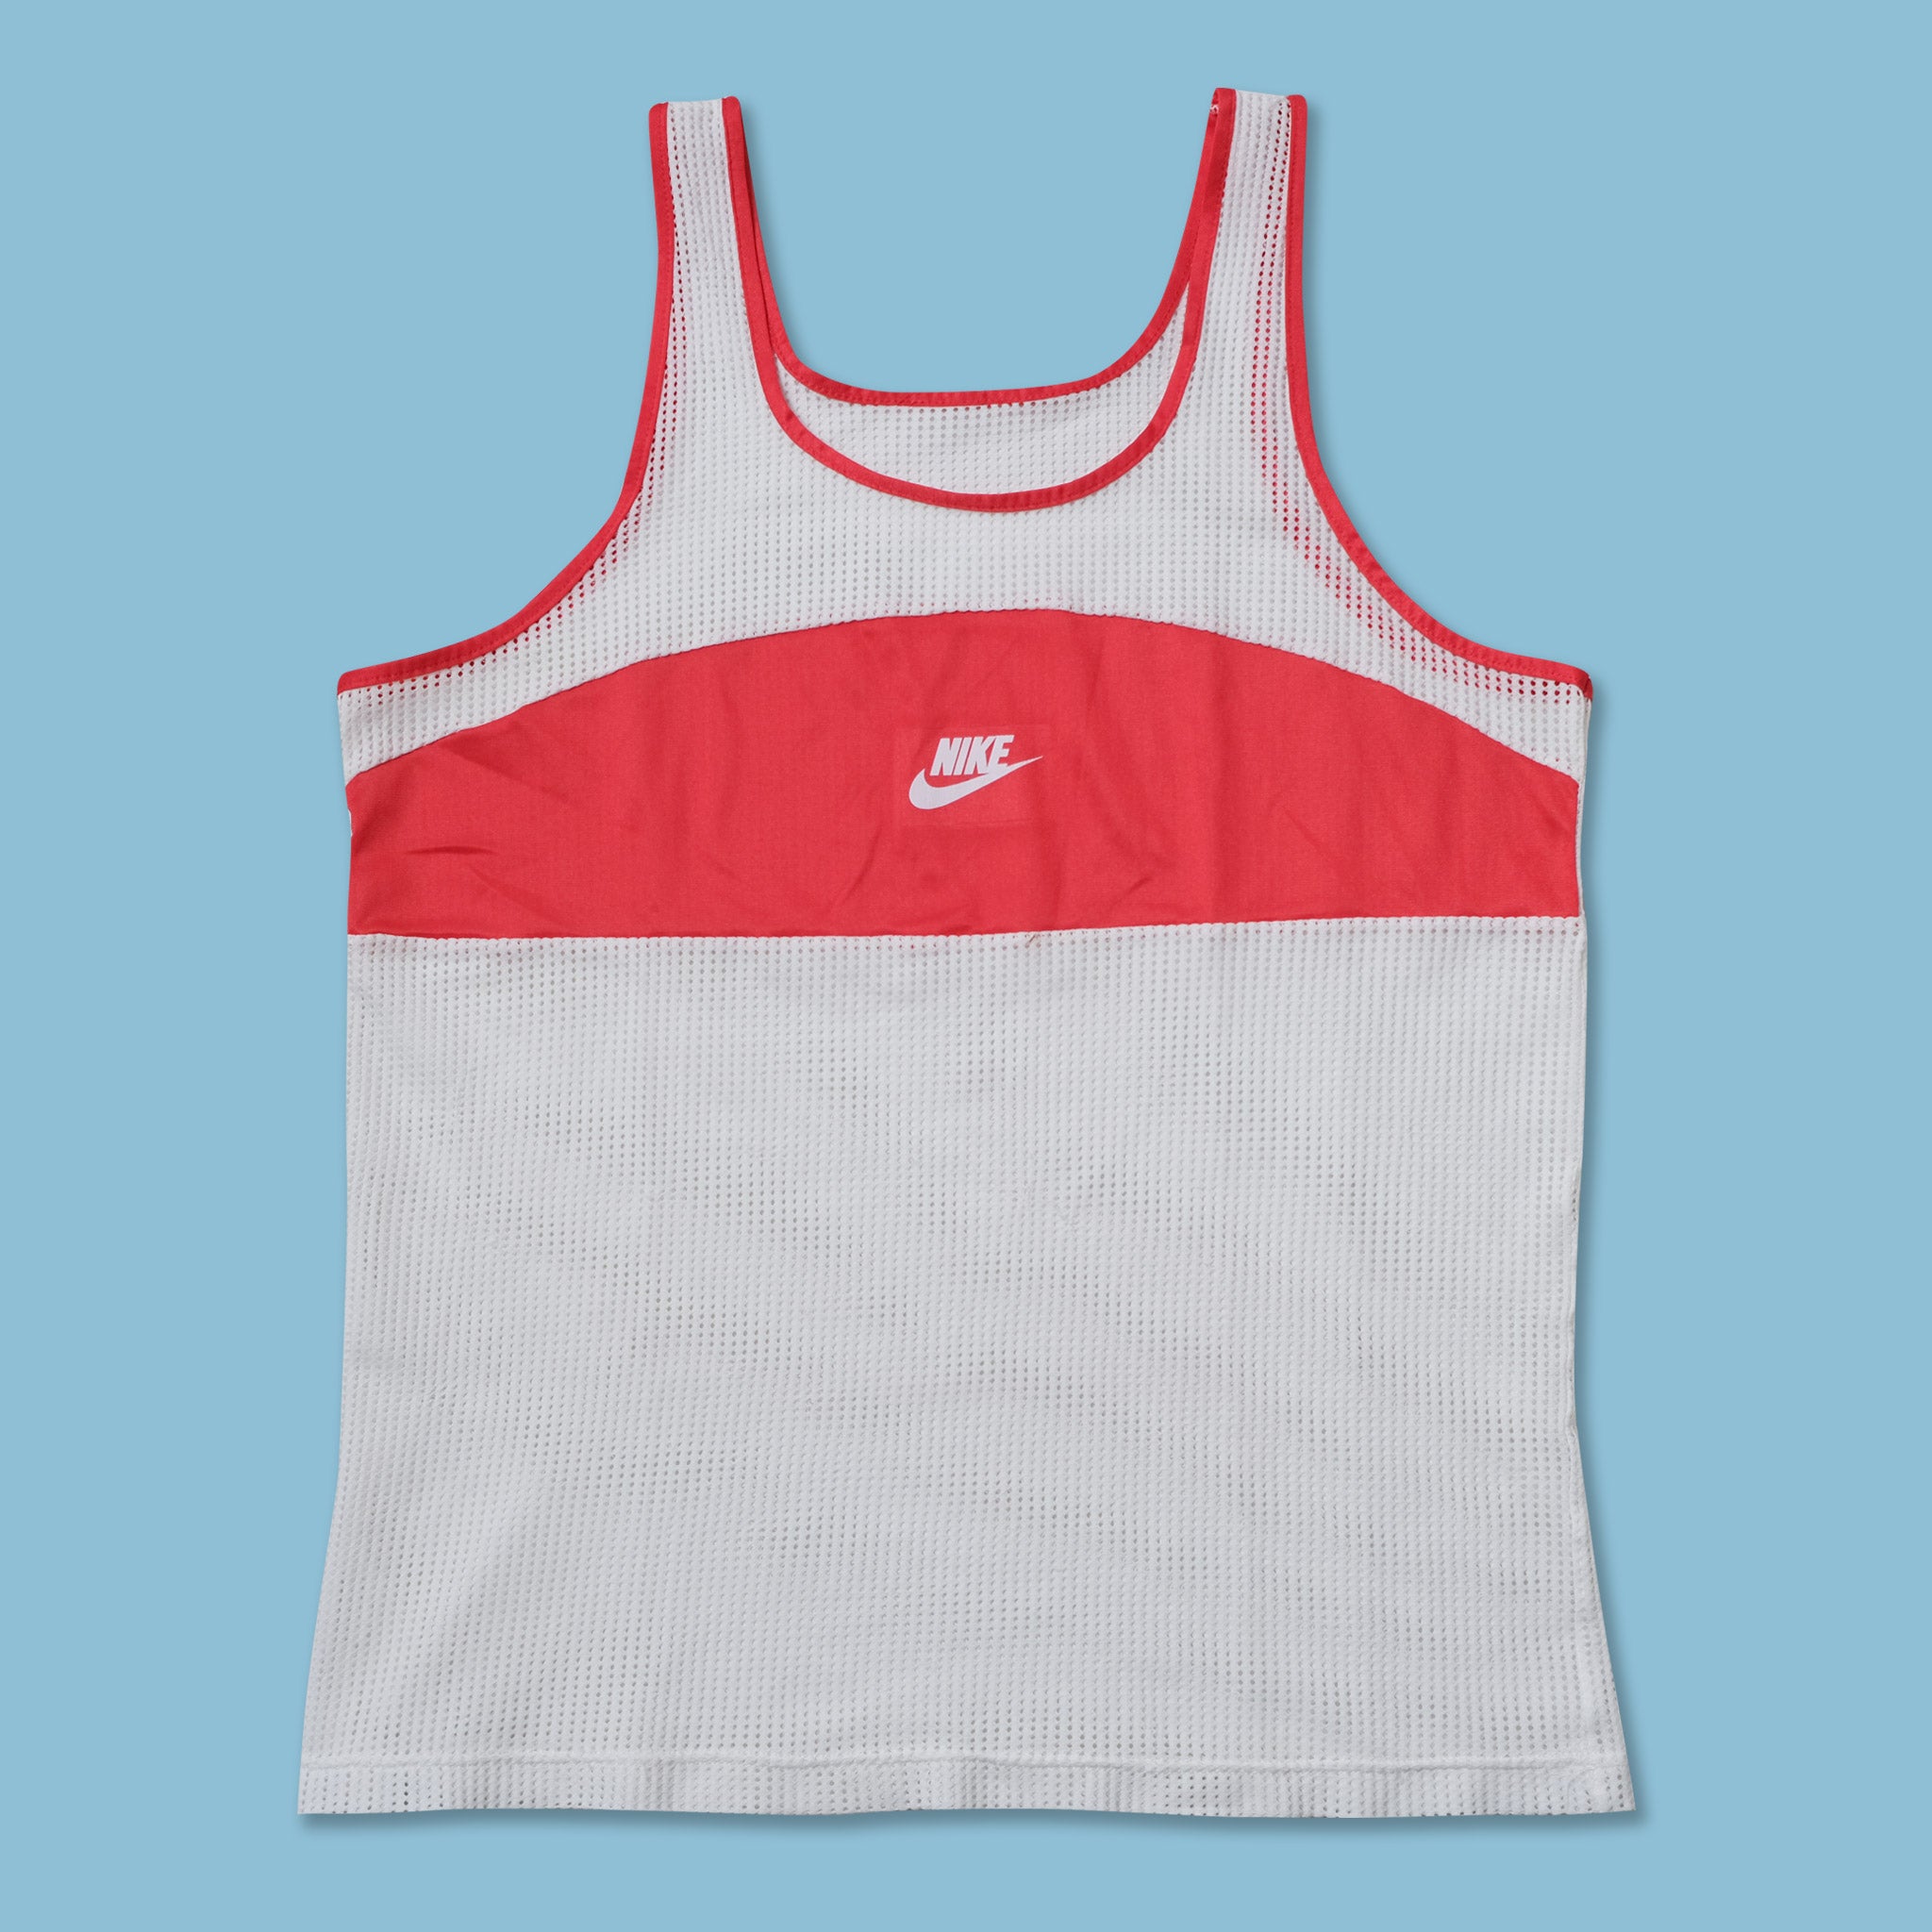 Vintage 80s Nike Tank Top Small 